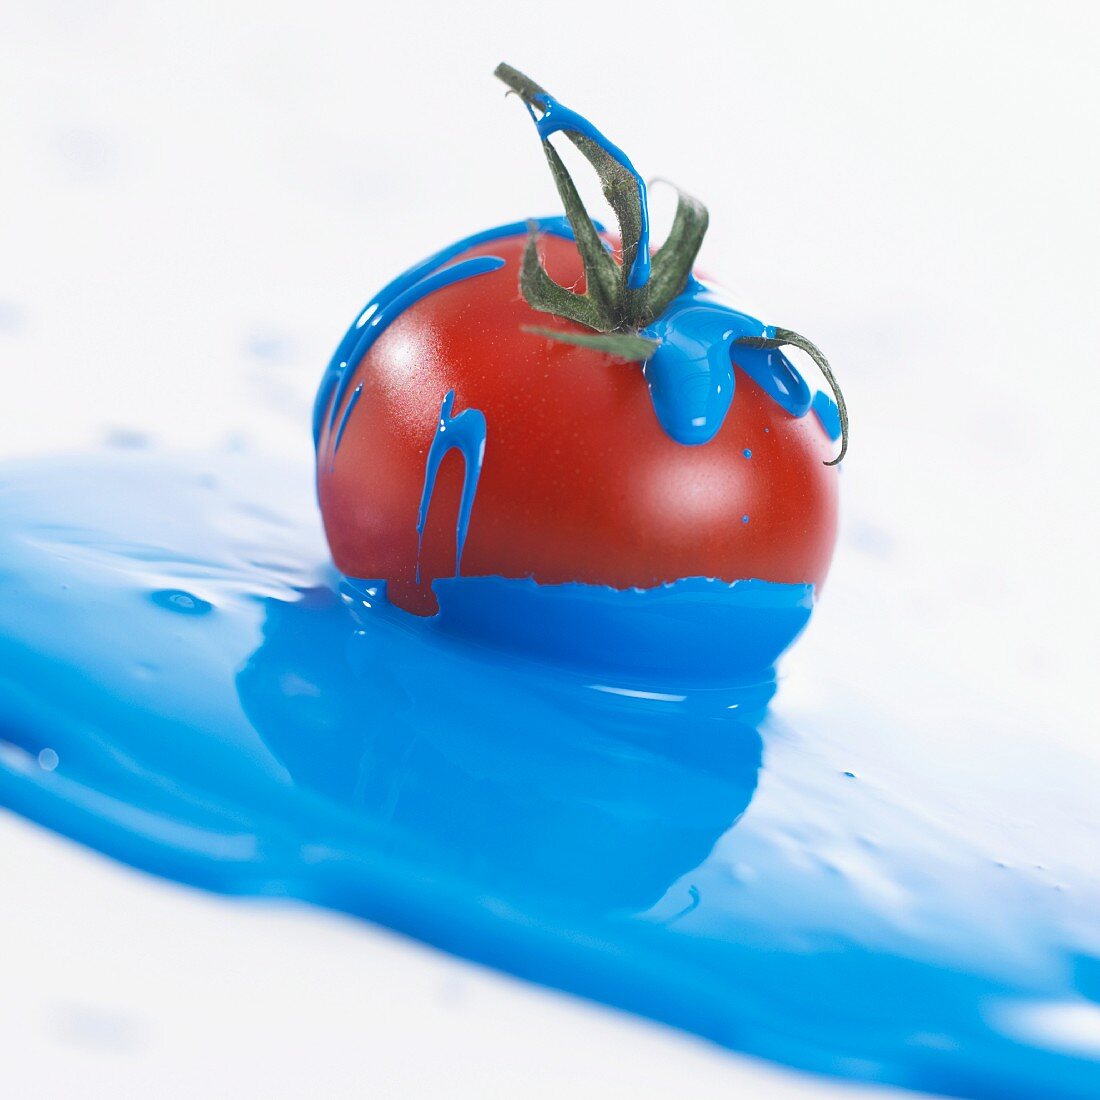 Tomate liegt in blauer Farbe